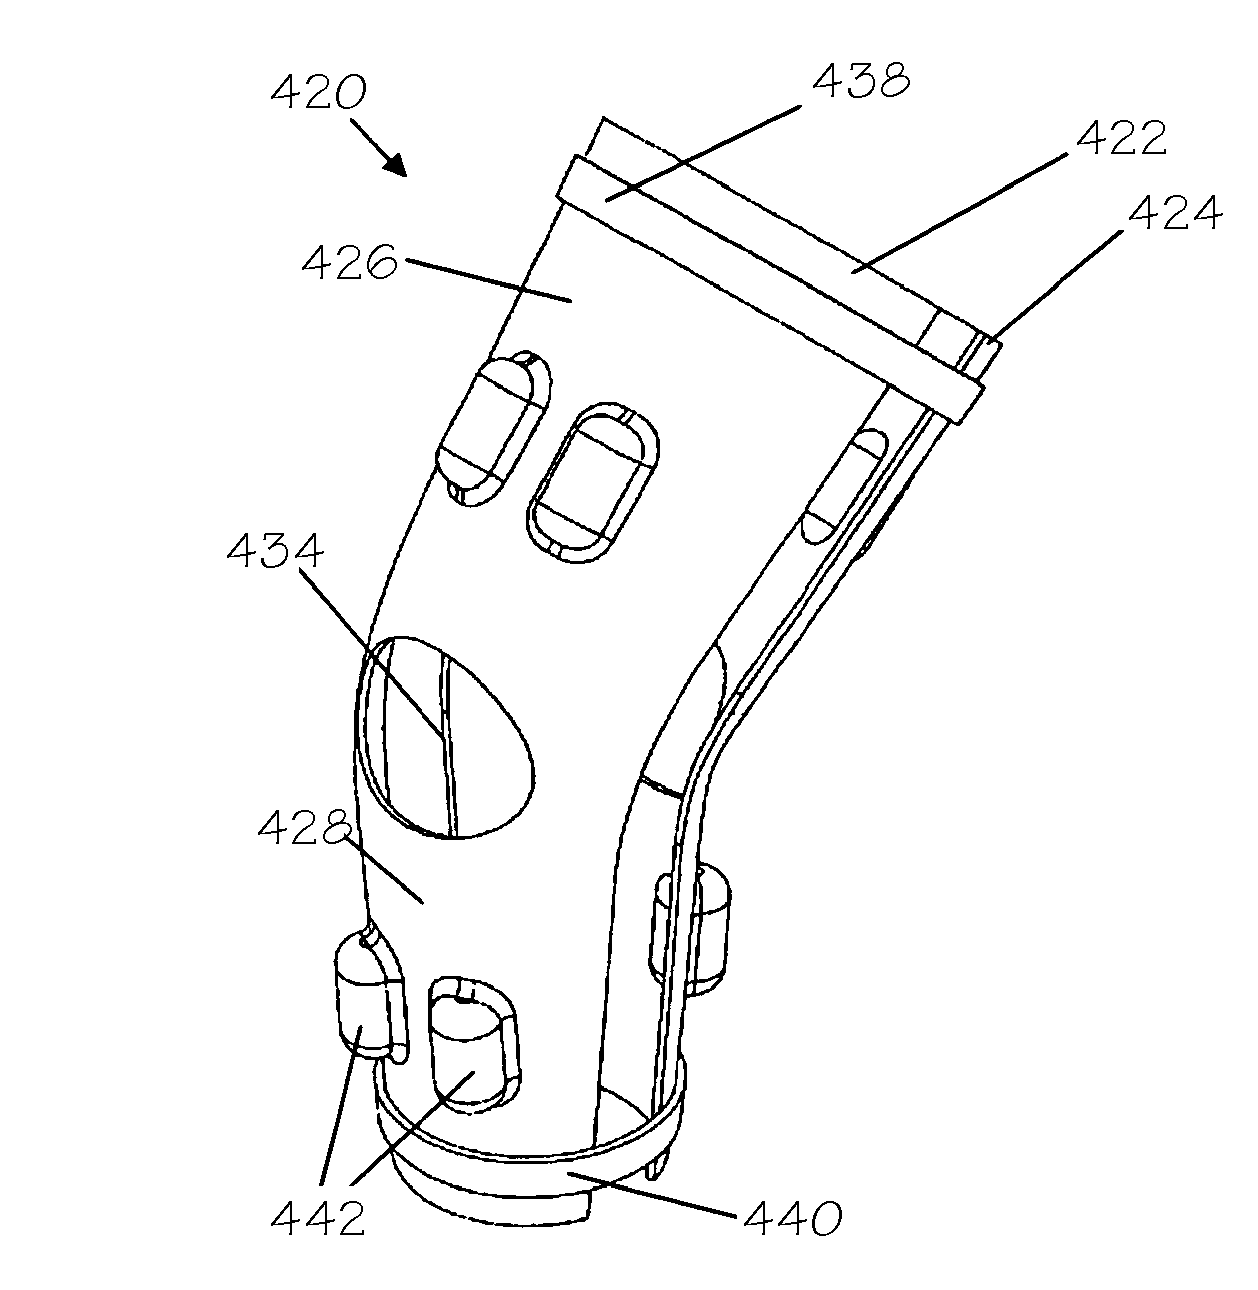 Devices and methods for treating restless leg syndrome